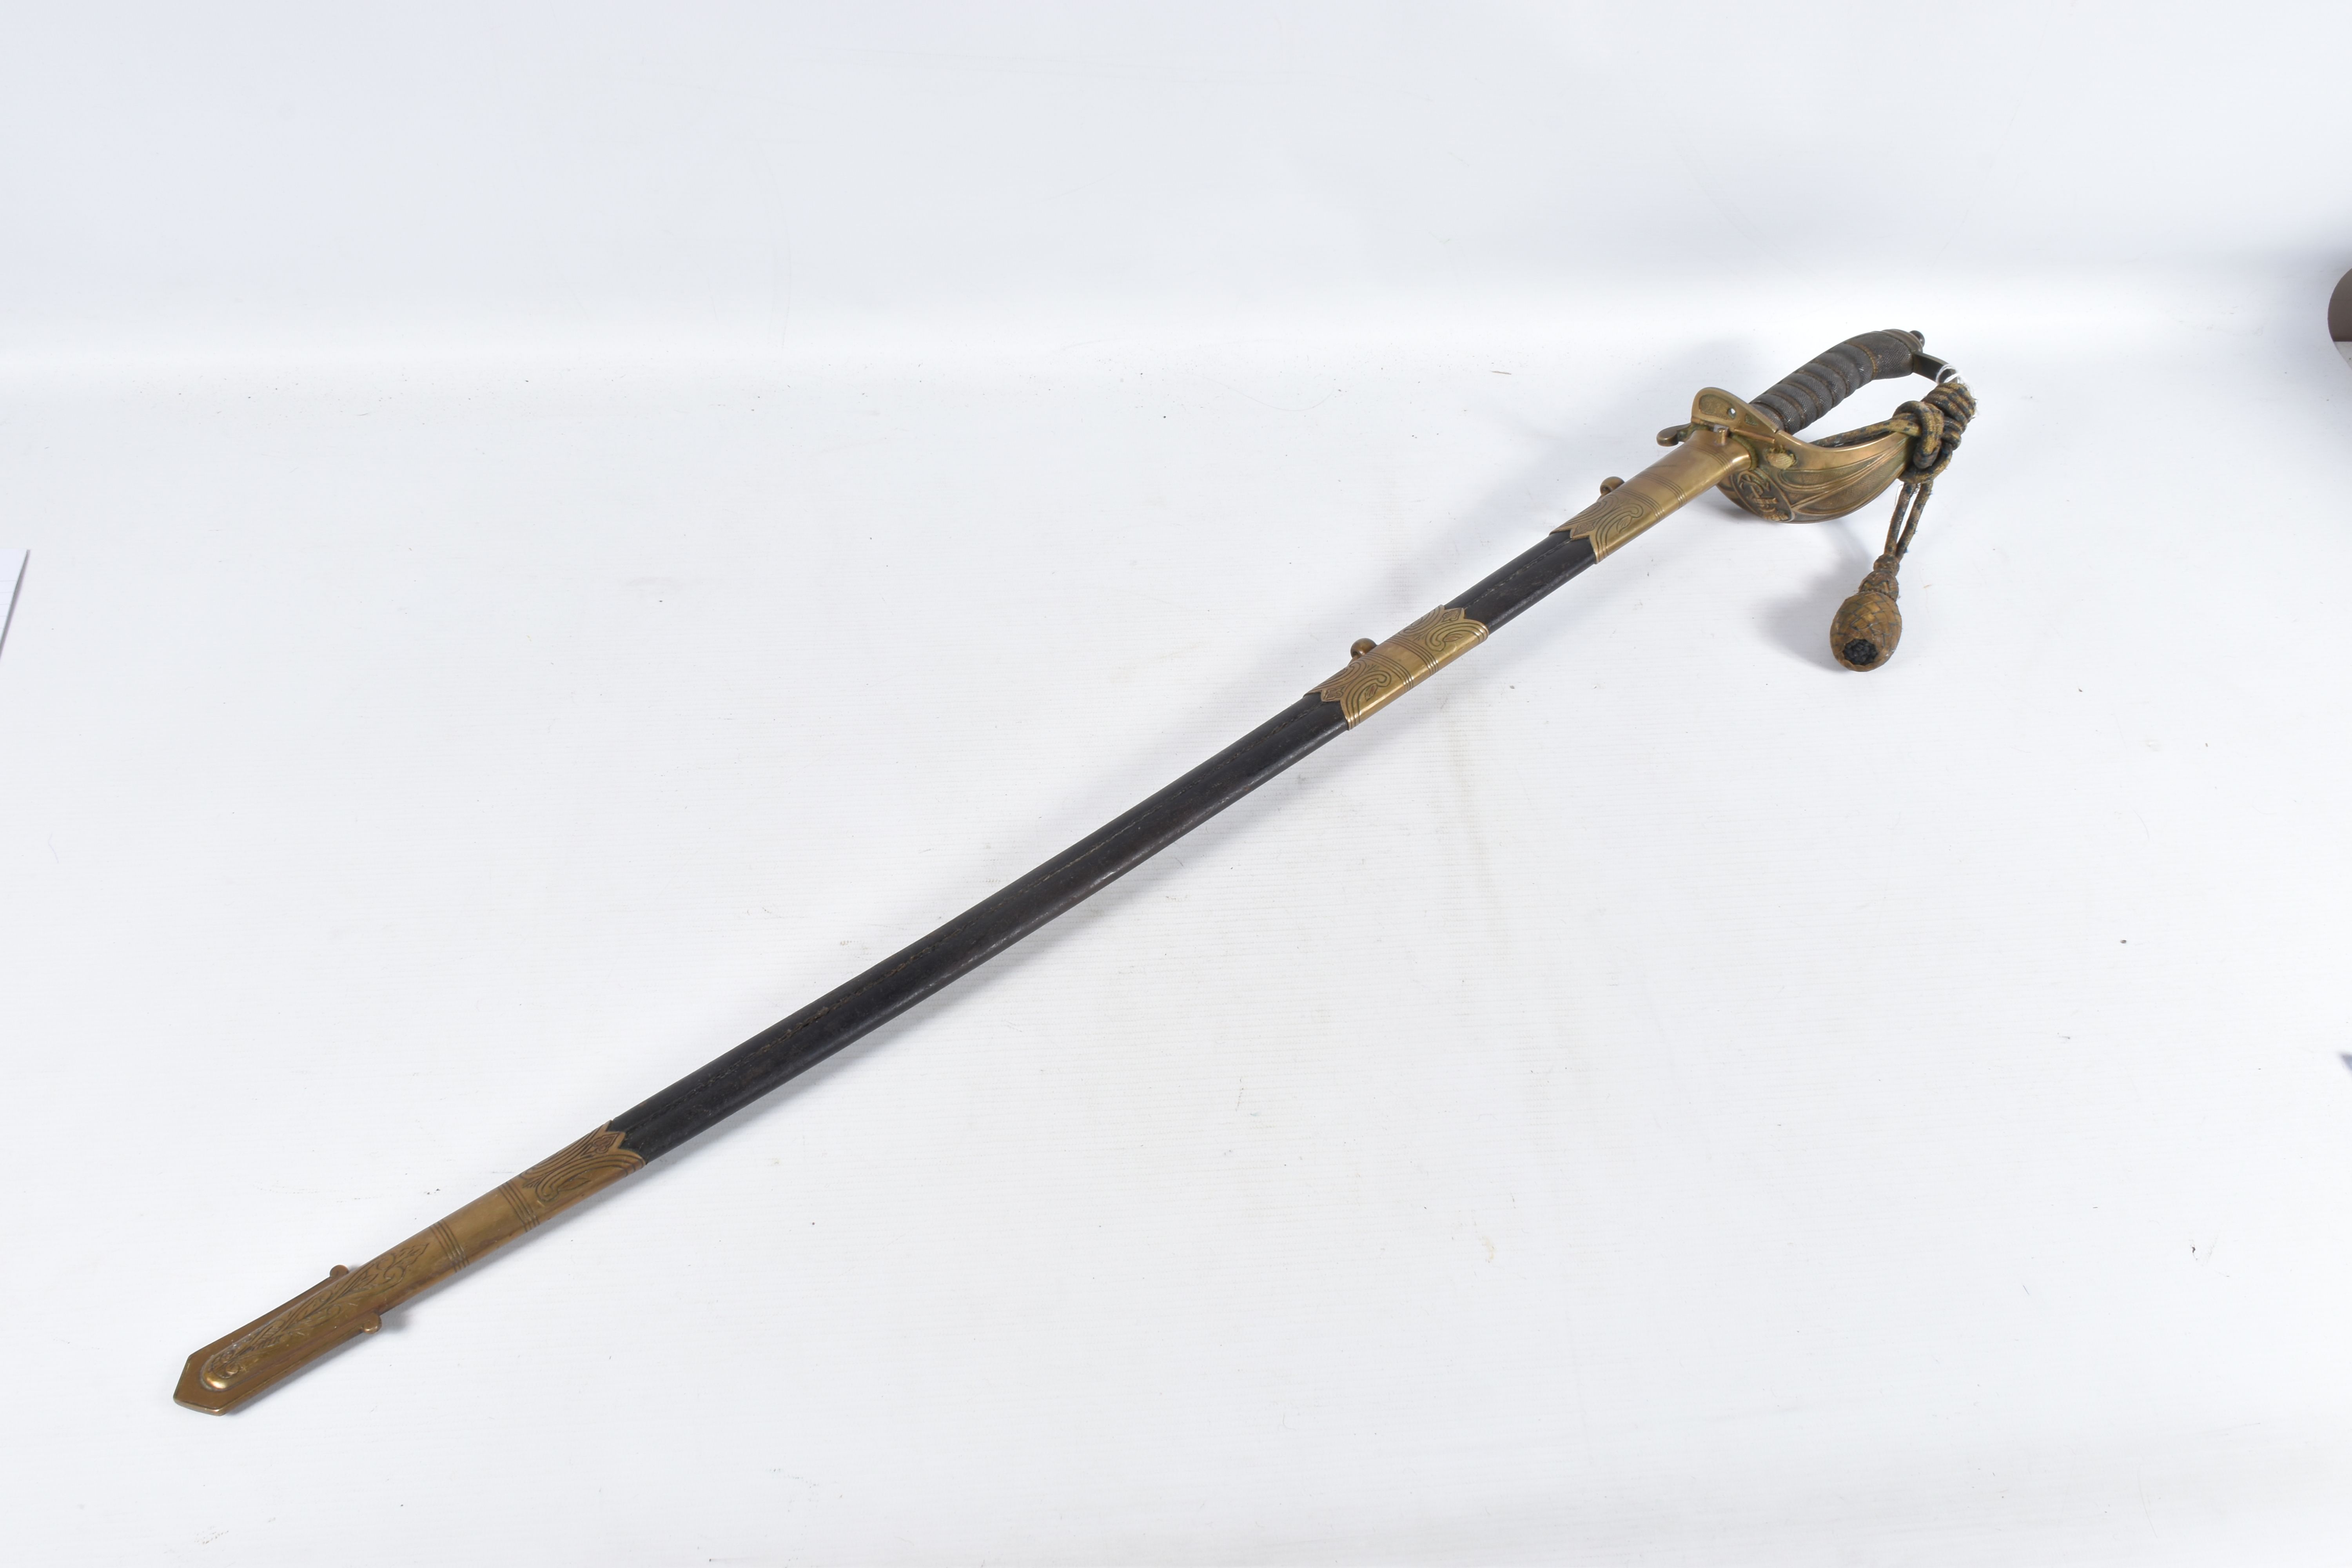 A 19TH OR 20TH CENTURY NAVAL DRESS SWORD, the blade has some ornate decoration on it but it is